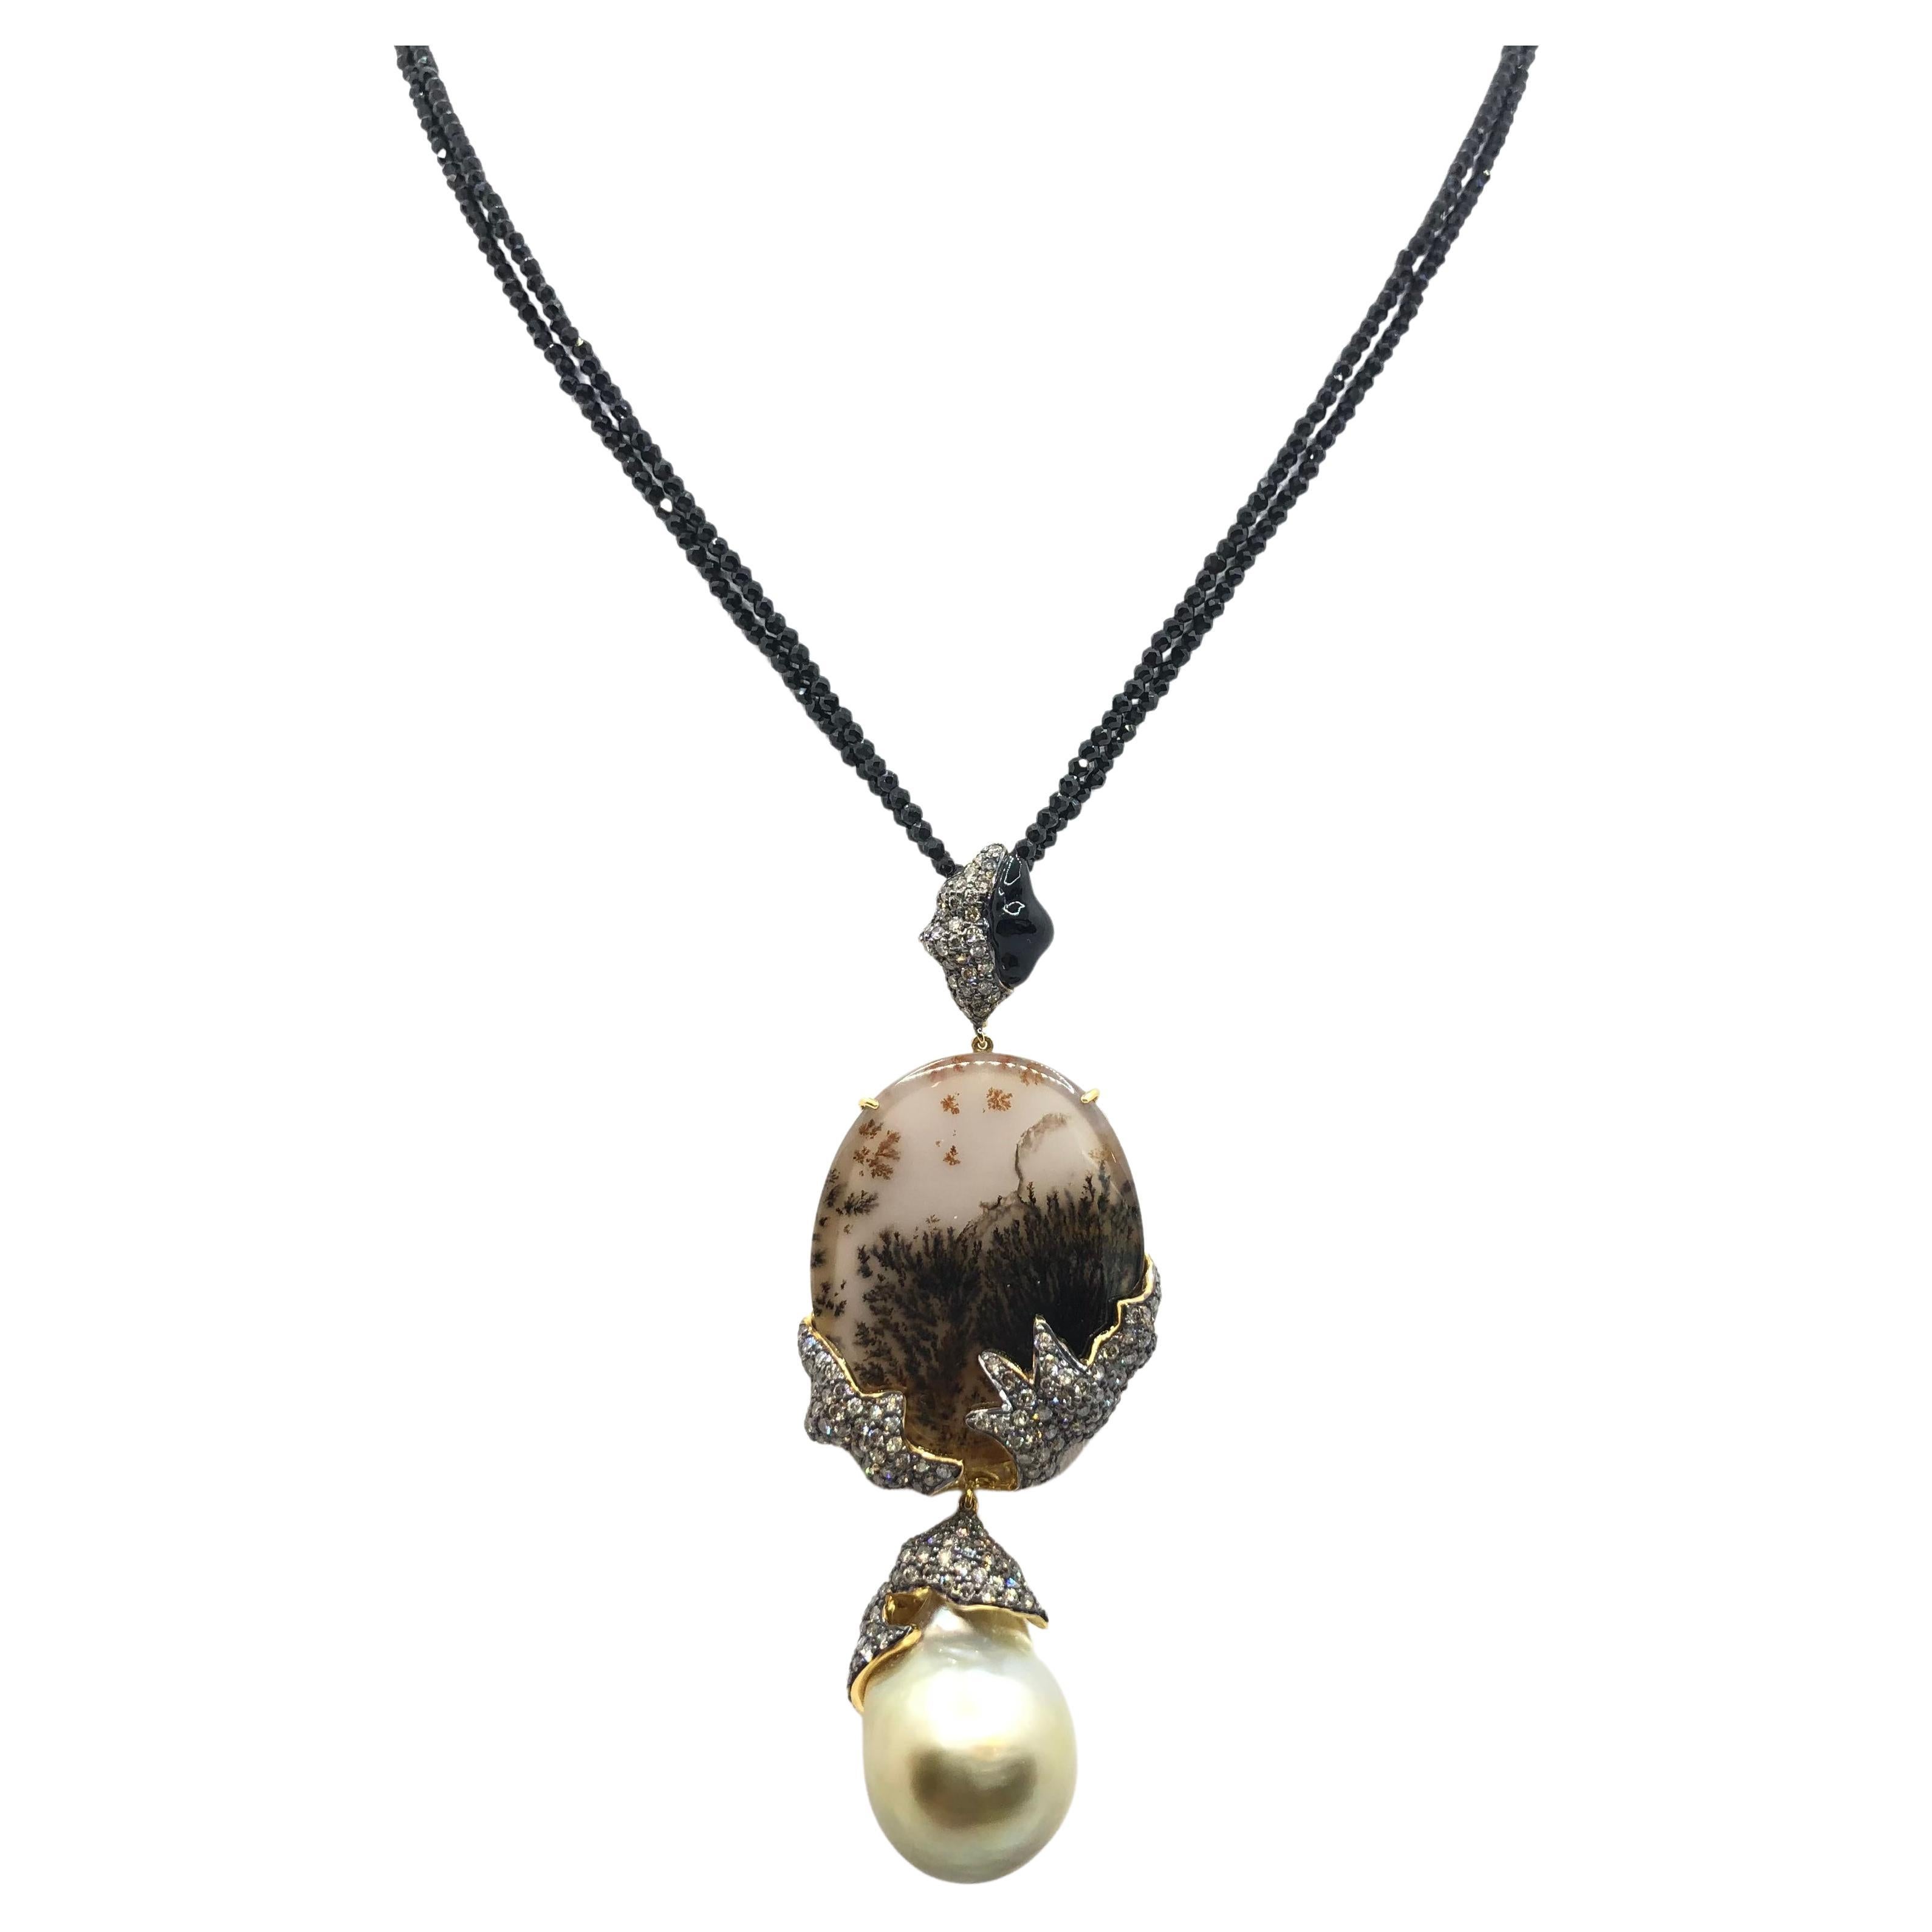 South Sea Pearl, Quartz, Brown Diamond with Black Spinel Necklace in 18K Gold